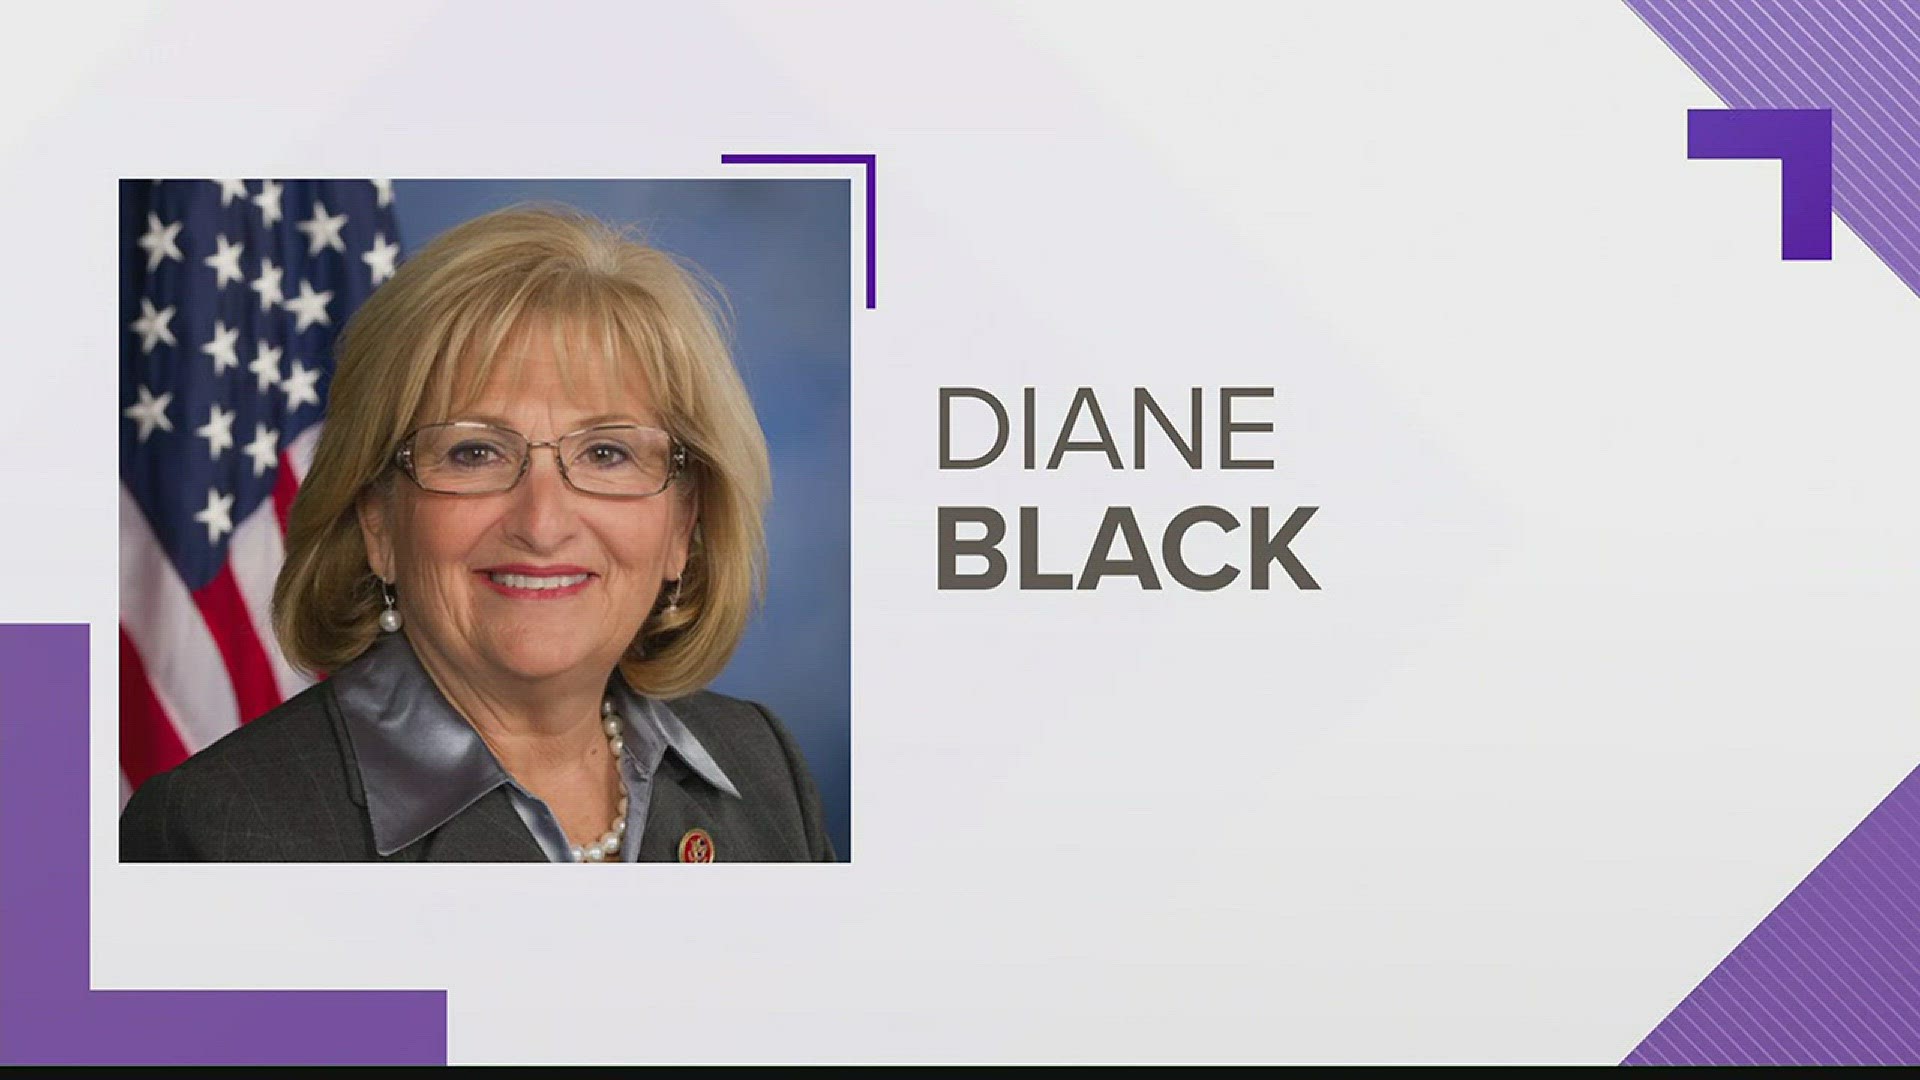 Rep. Diane Black (R- Tenn.) said she will leave her role as Chairman of the House Budget Committee to focus on her bid to succeed Gov. Bill Haslam as Tennessee's next governor.